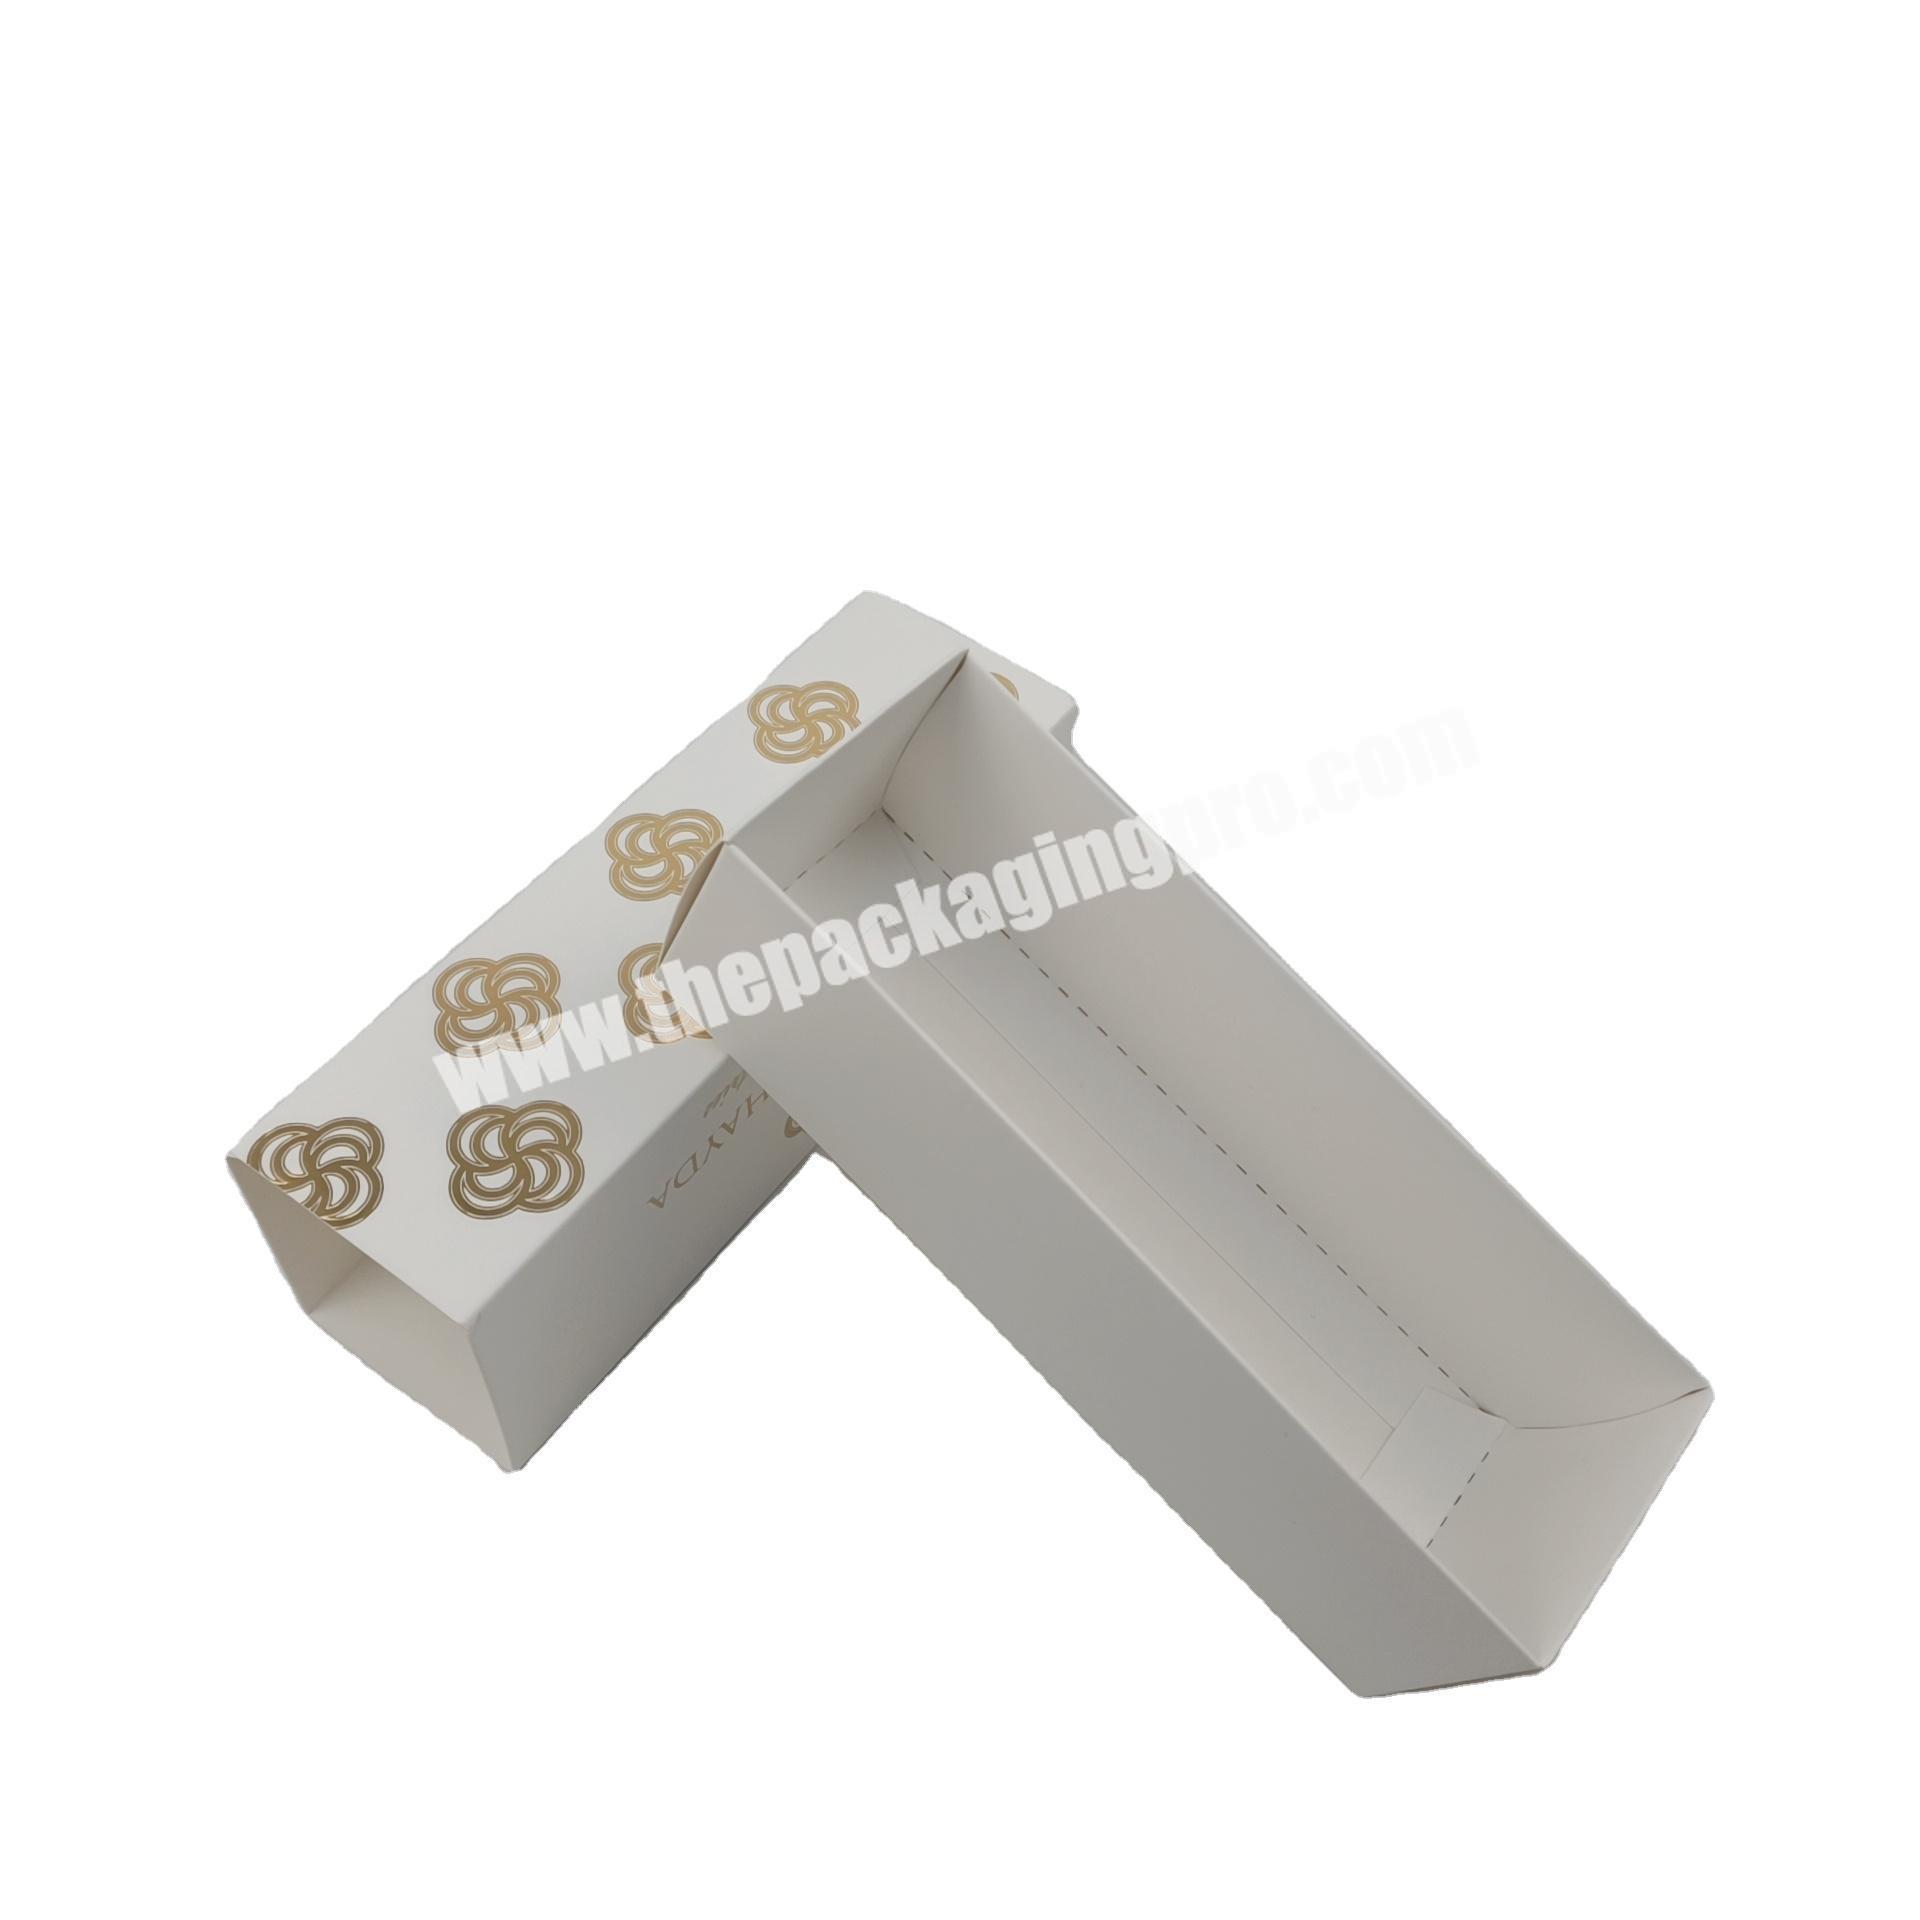 High quality paper drawer boxes for jewelry gift packaging with your own logo